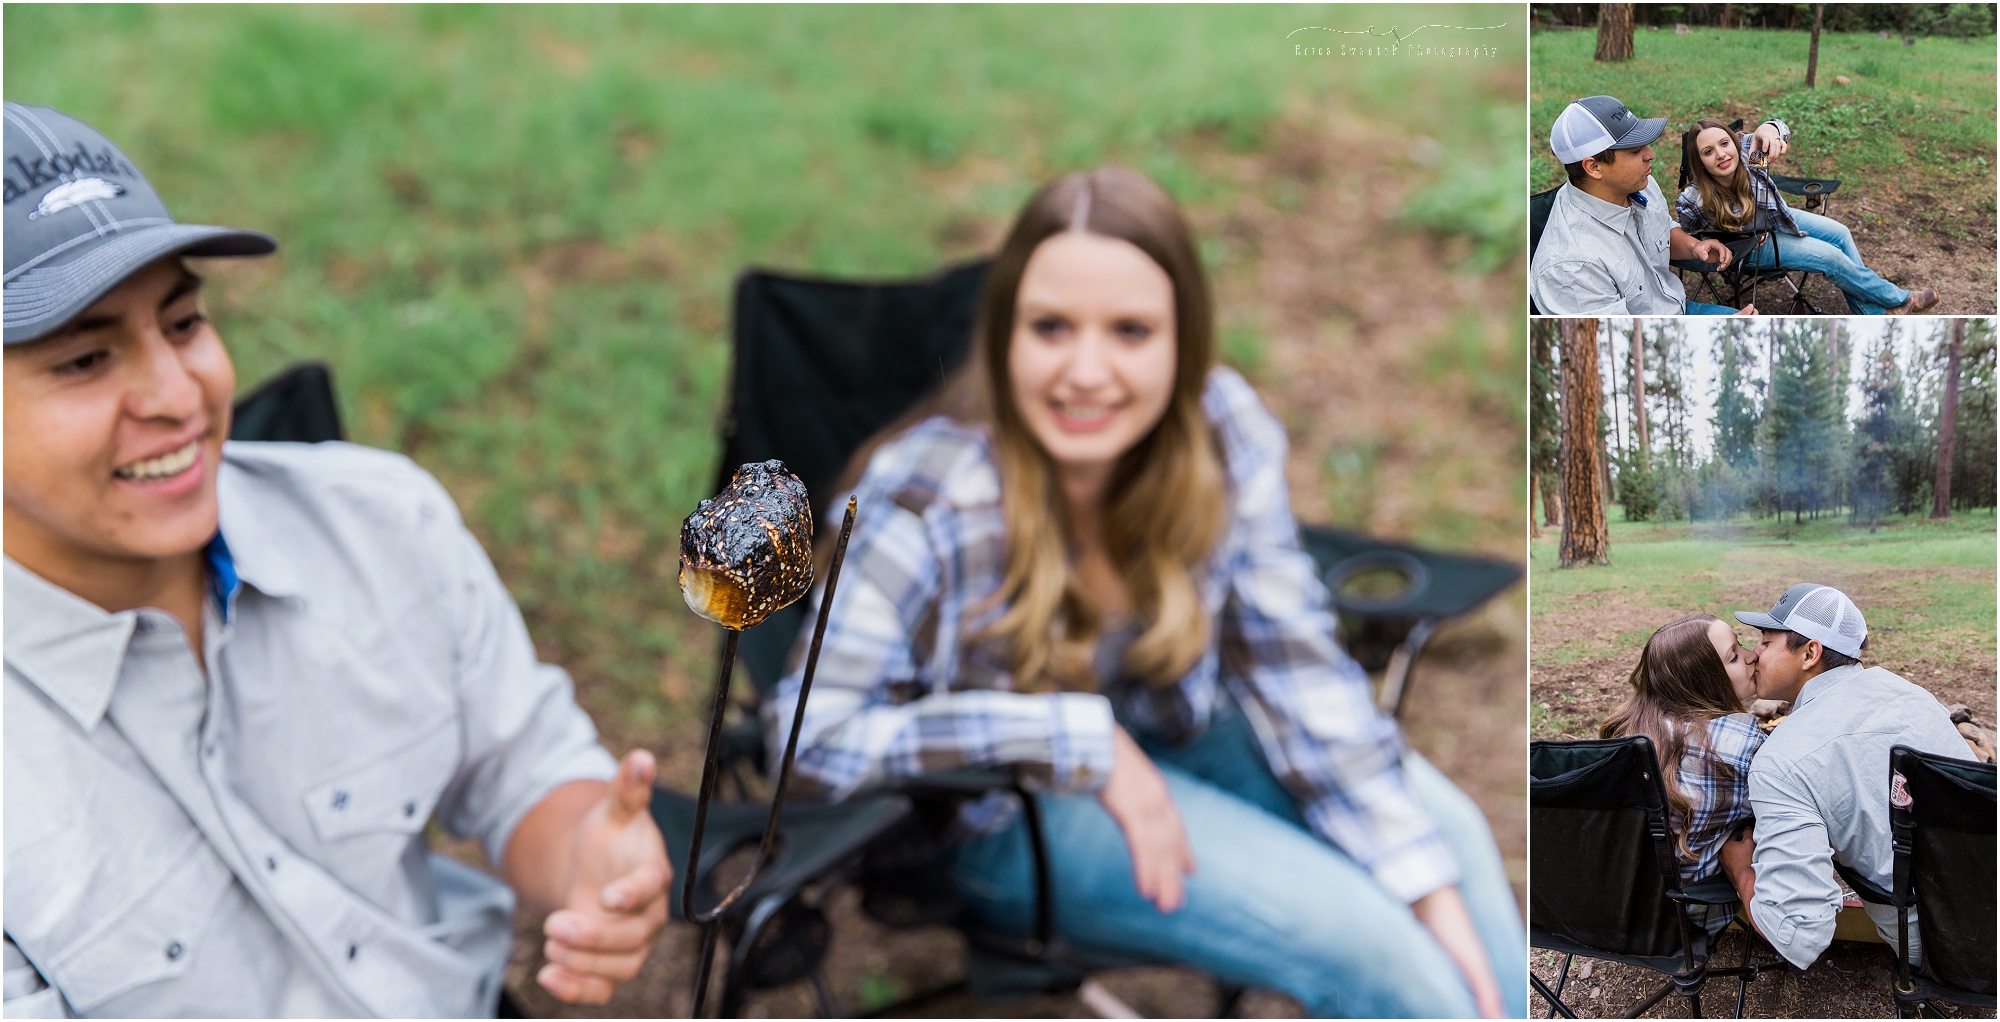 A fun loving couple at a casual outdoor engagement photo session near Prineville, OR. | Erica Swantek Photography